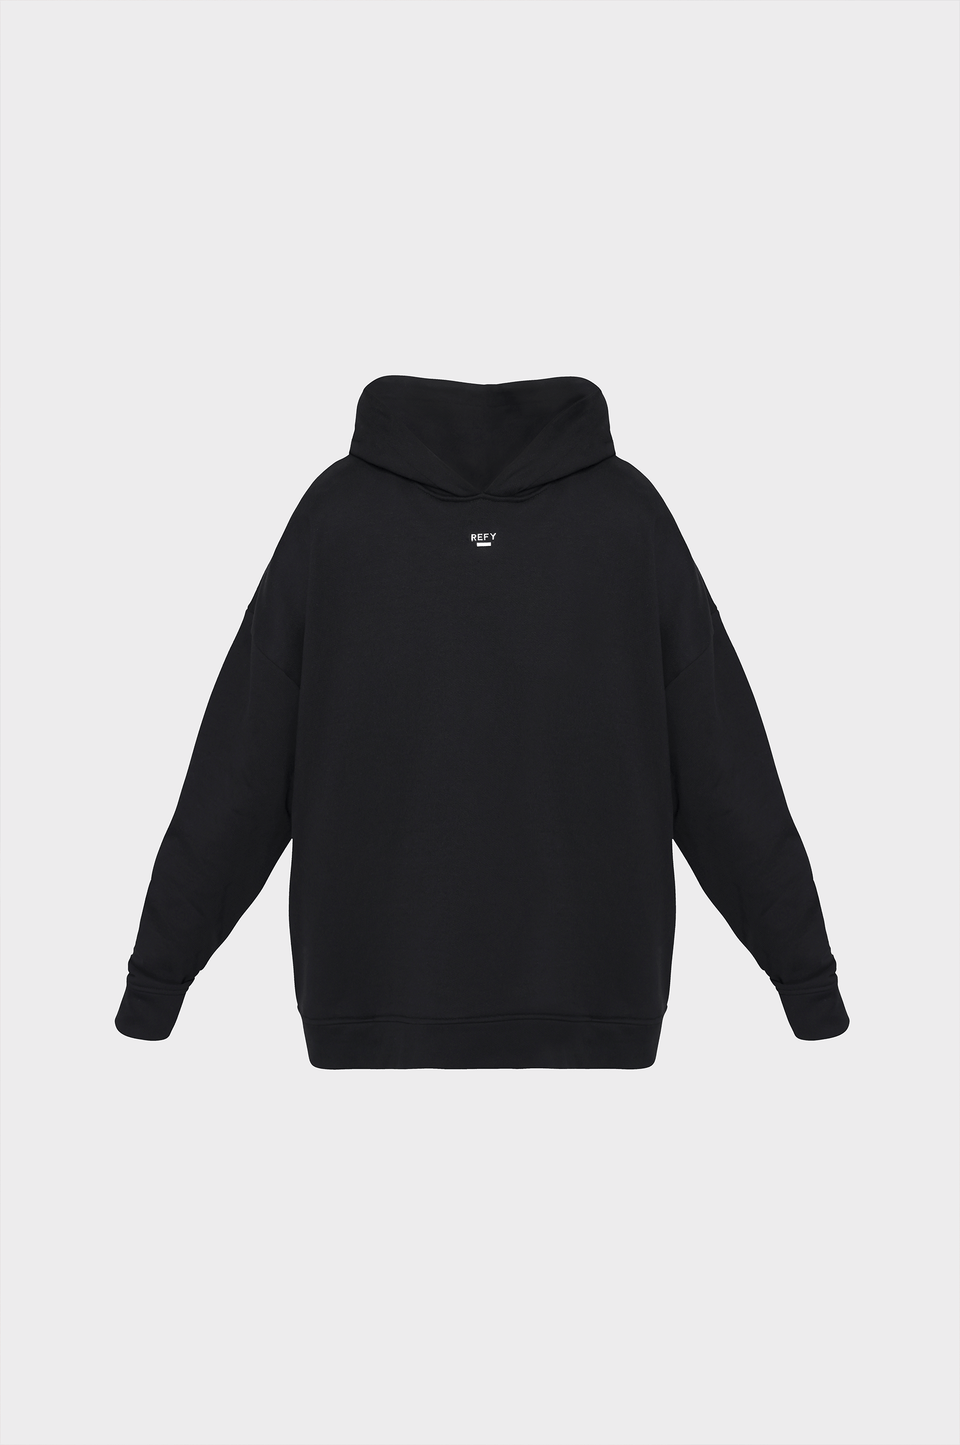 REFY CURATED OVERSIZED BOXY HOODIE IN BLACK